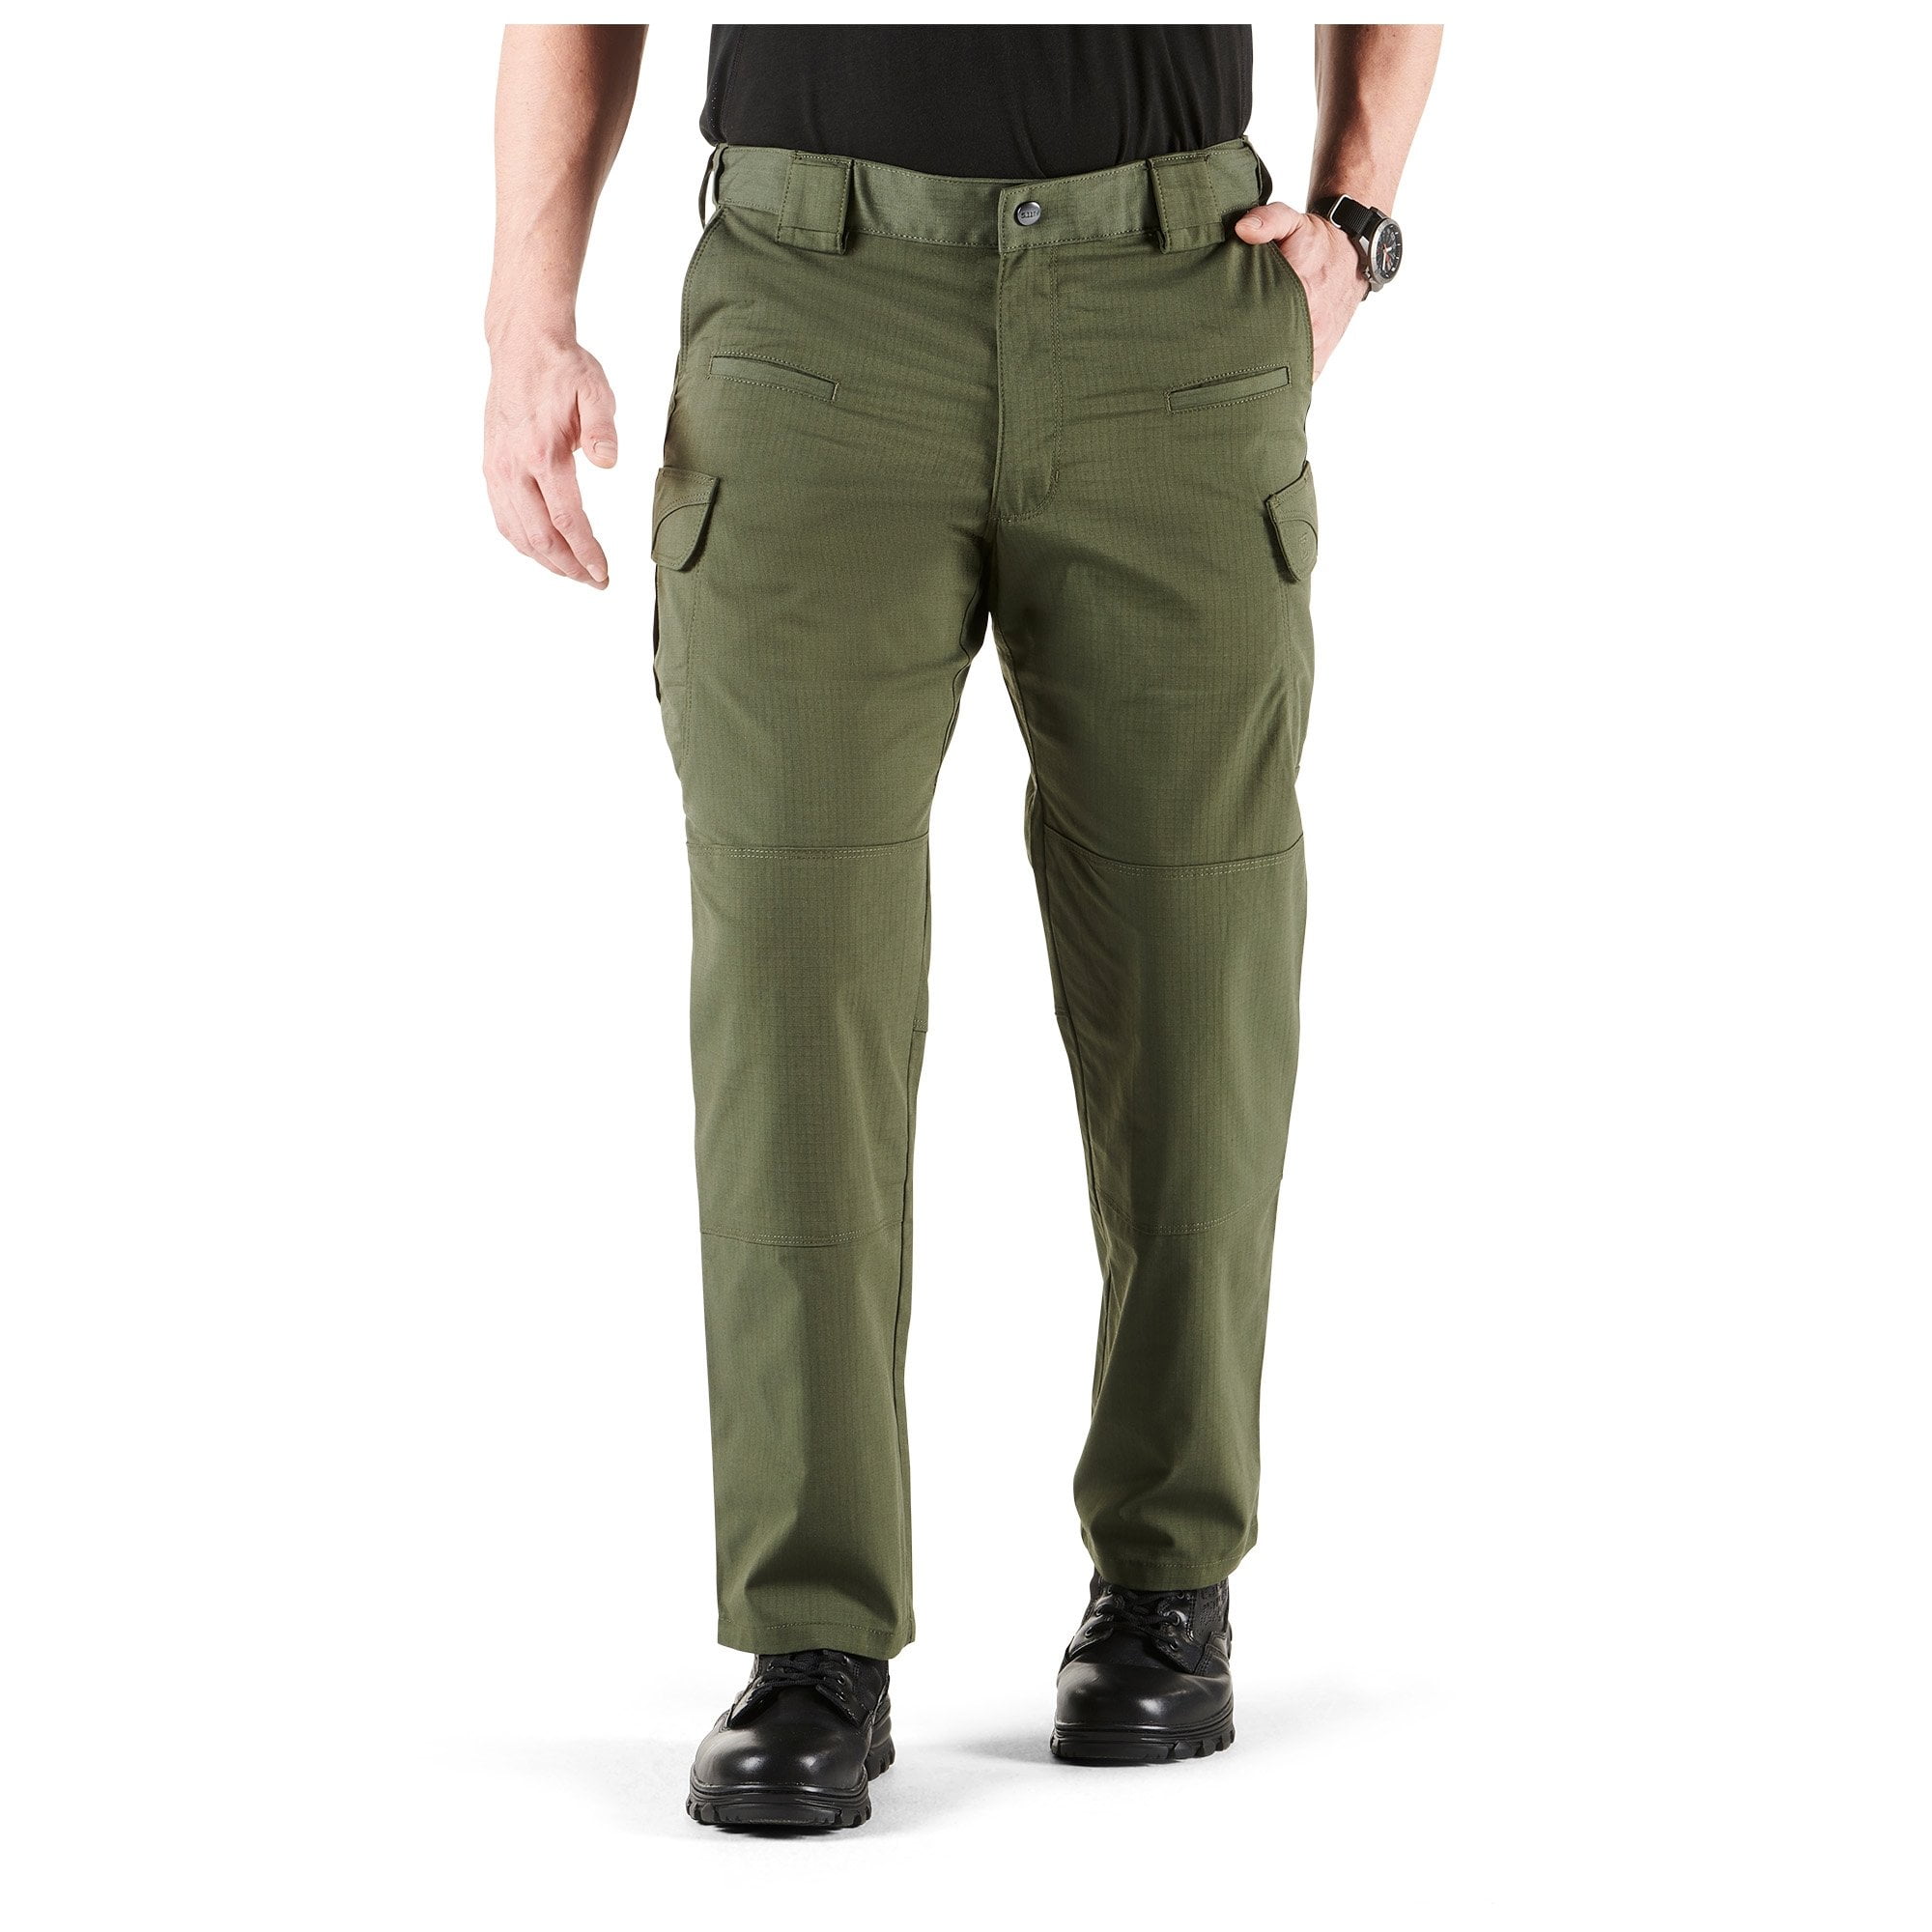 M-Tac Operator Flex Tactical Pants Military Men's Cargo Pants with Pockets 